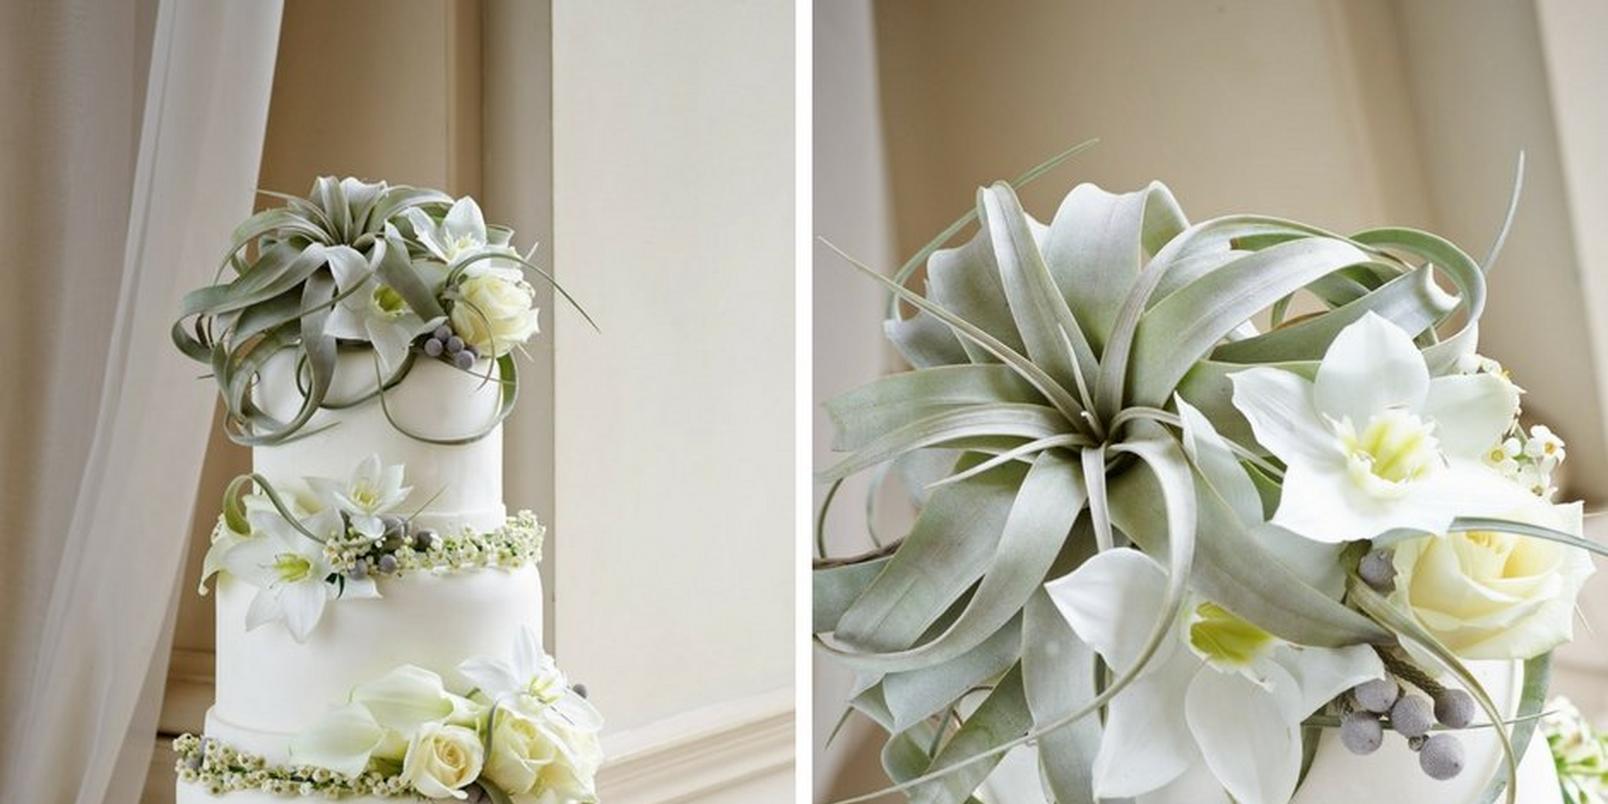 white-wedding-cake-with-white-floral-decorations